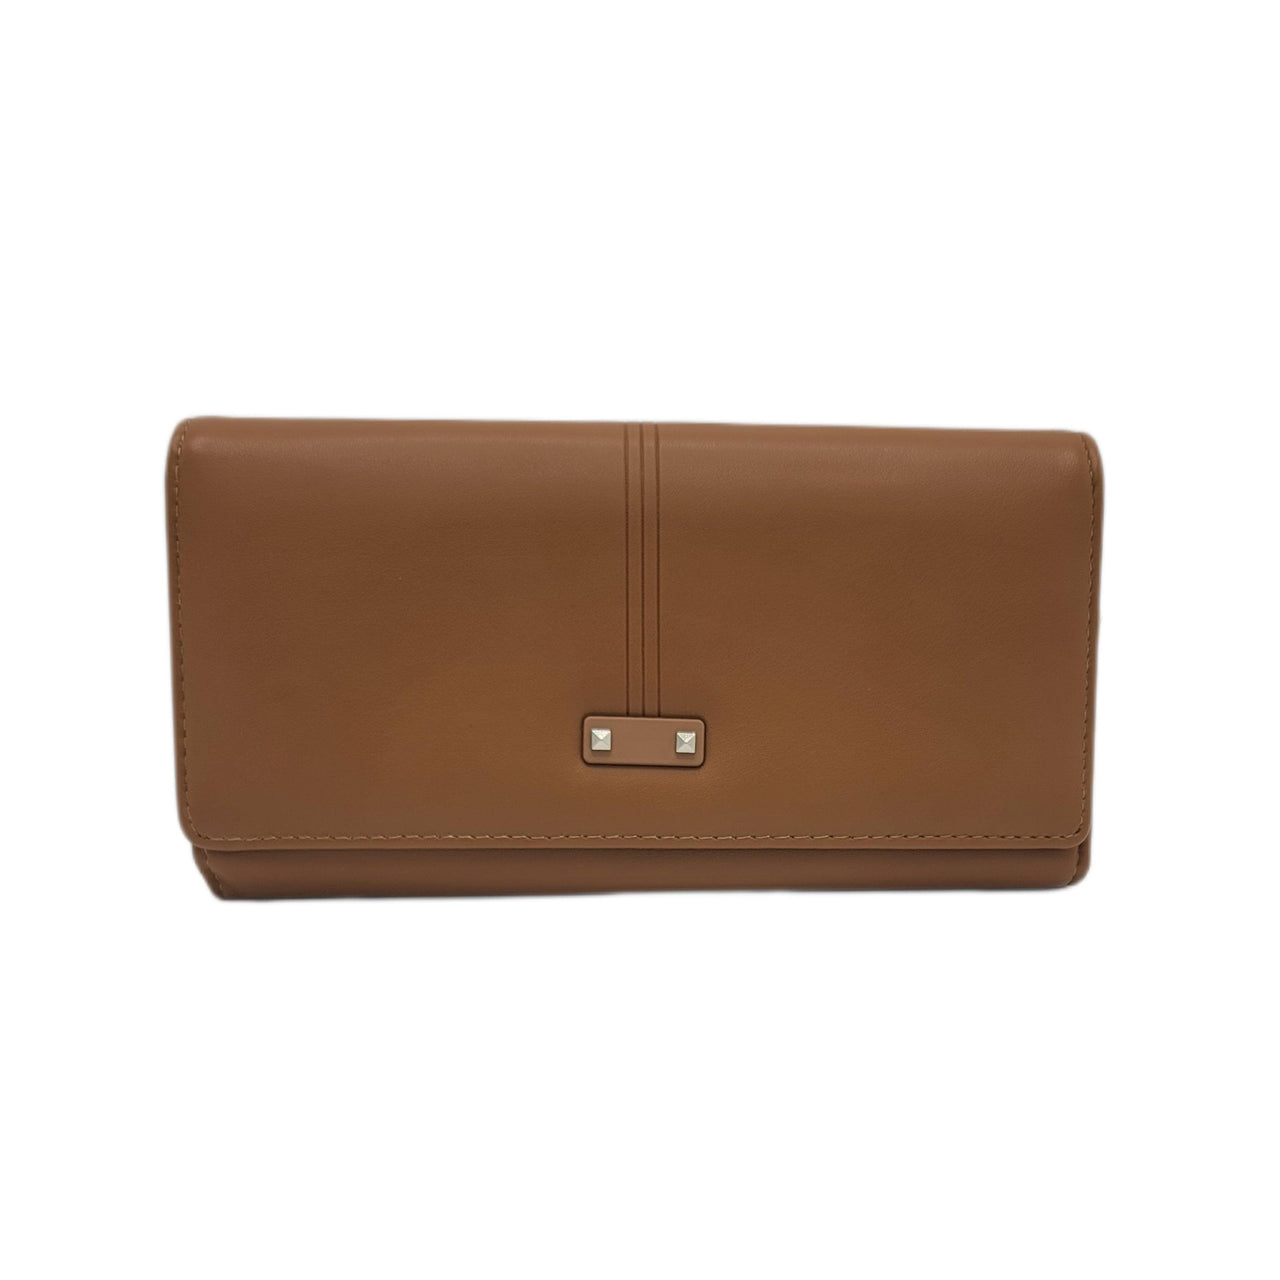 The Bag Couture Luggage & Bags Camel TBC Faux Leather Wallet Camel